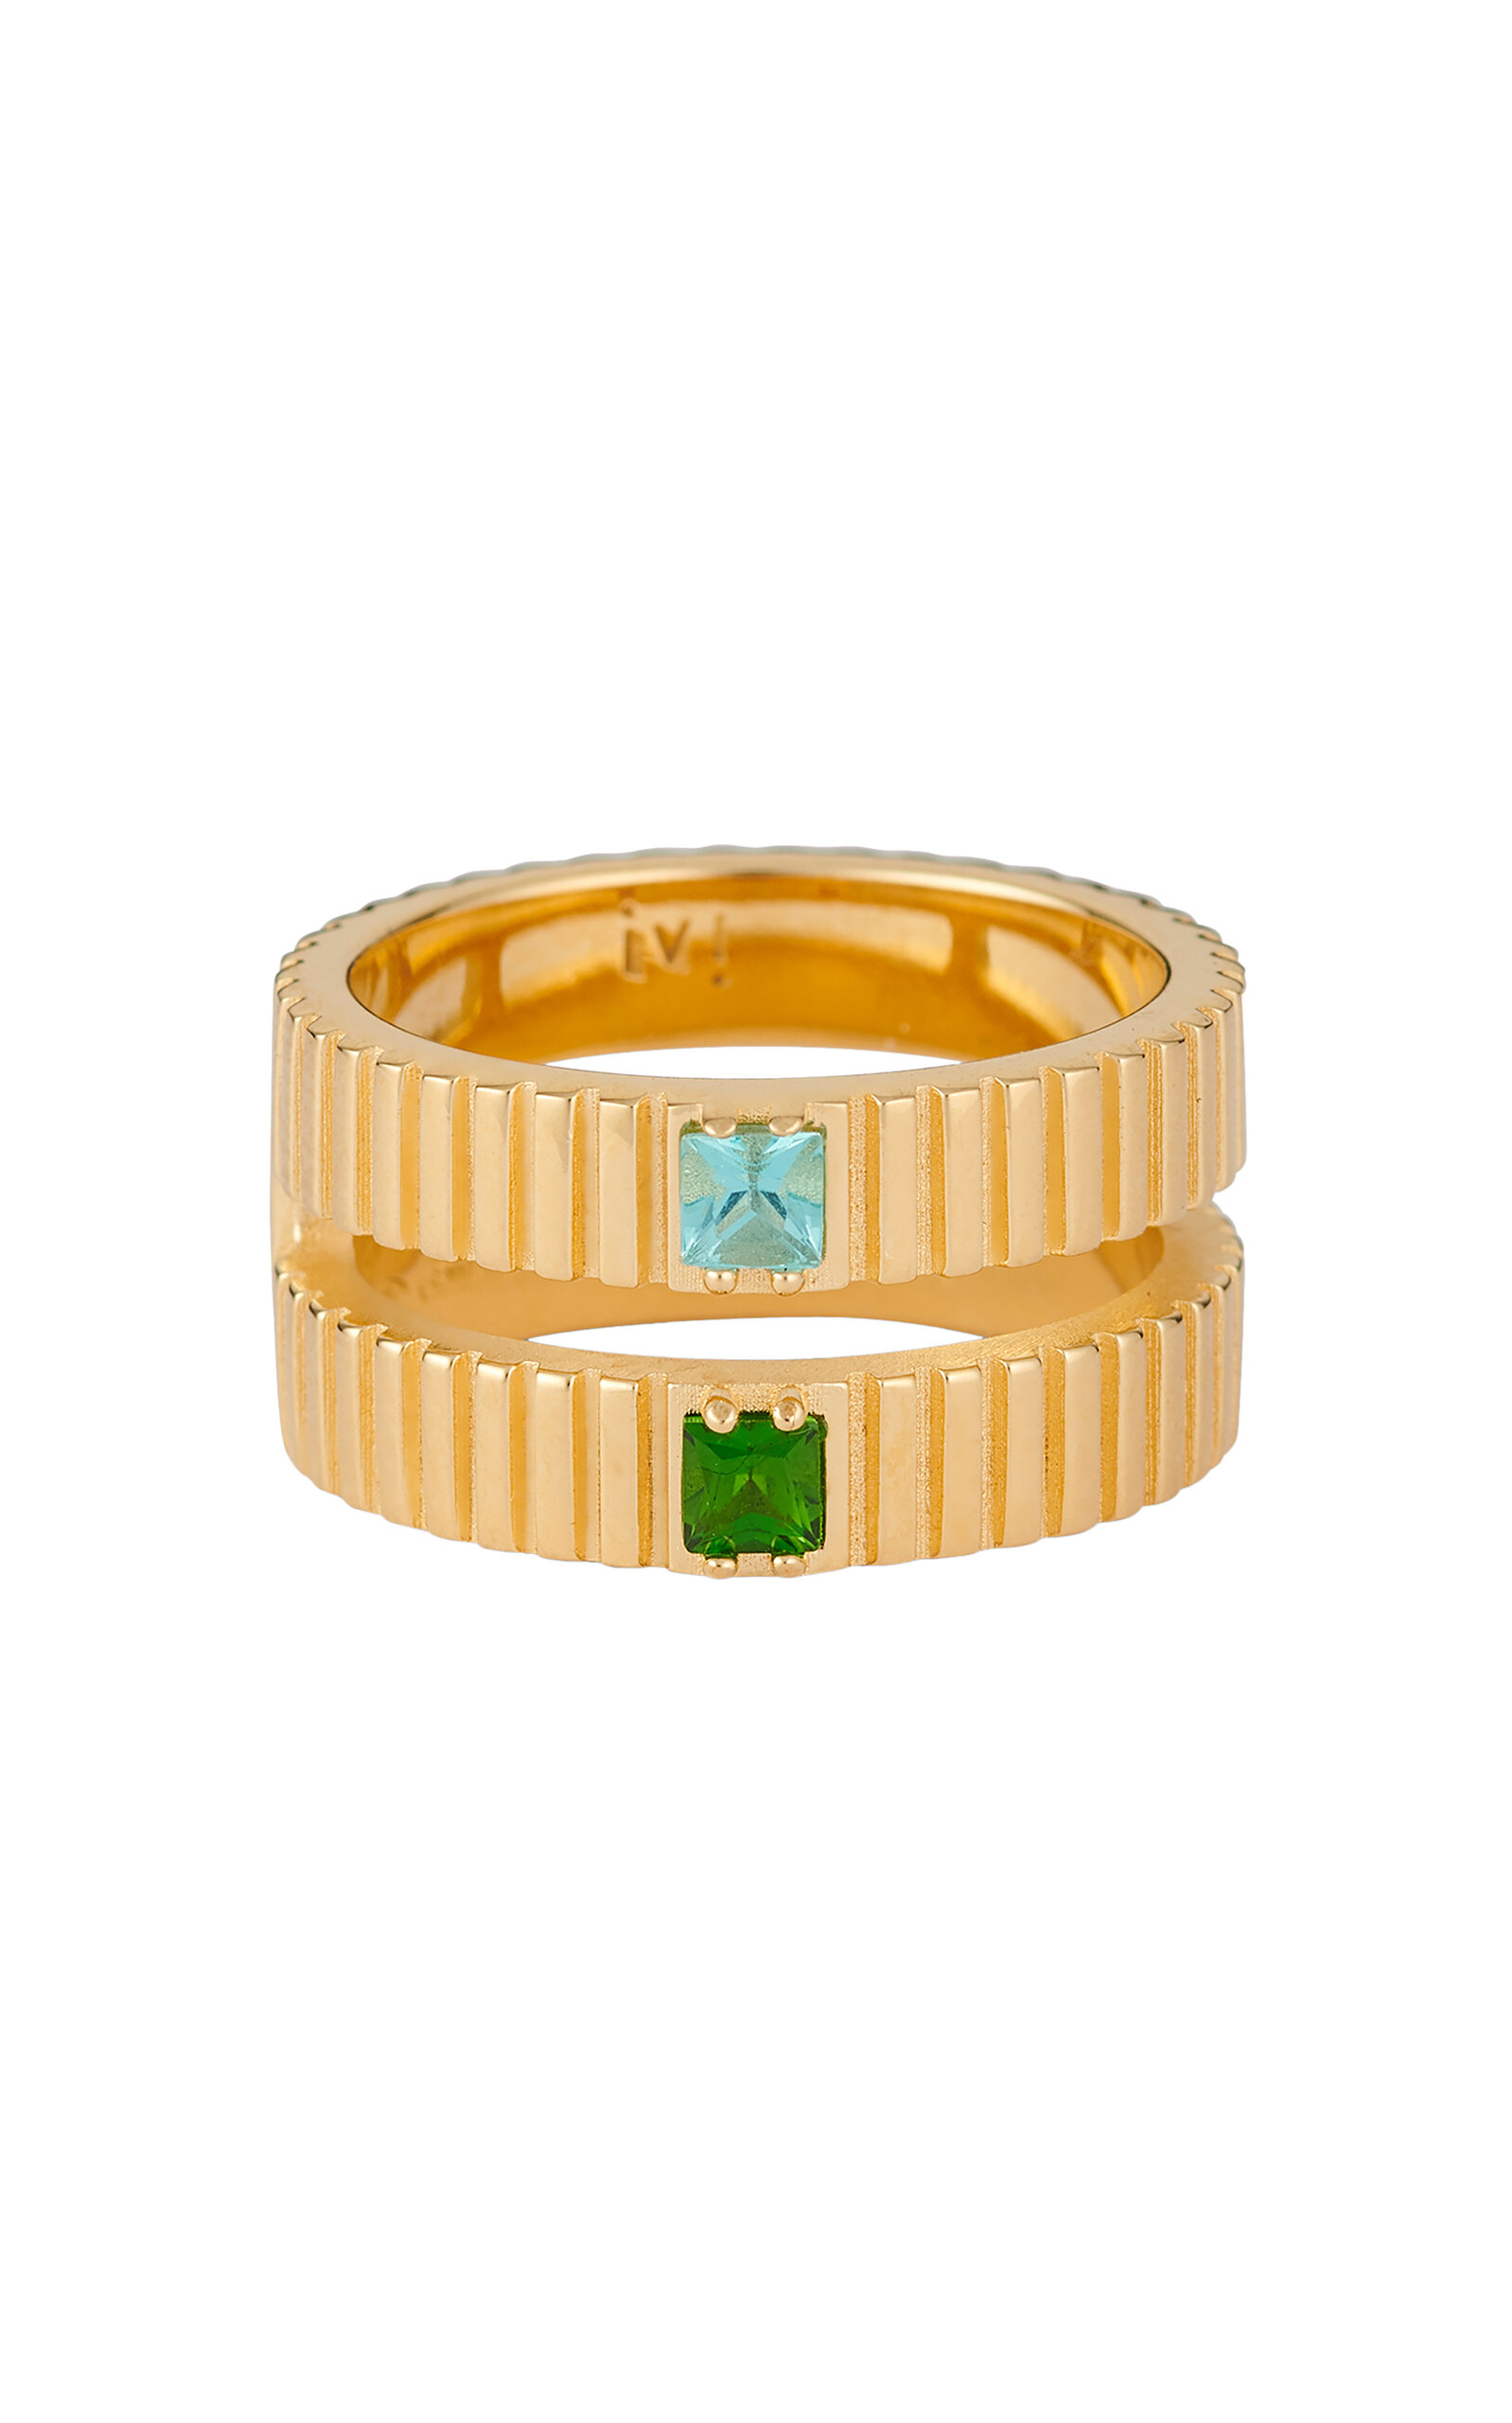 IVI Women's Slot Chromodiopside & Apatite 9k Yellow-Gold Vermeil Plated Ring